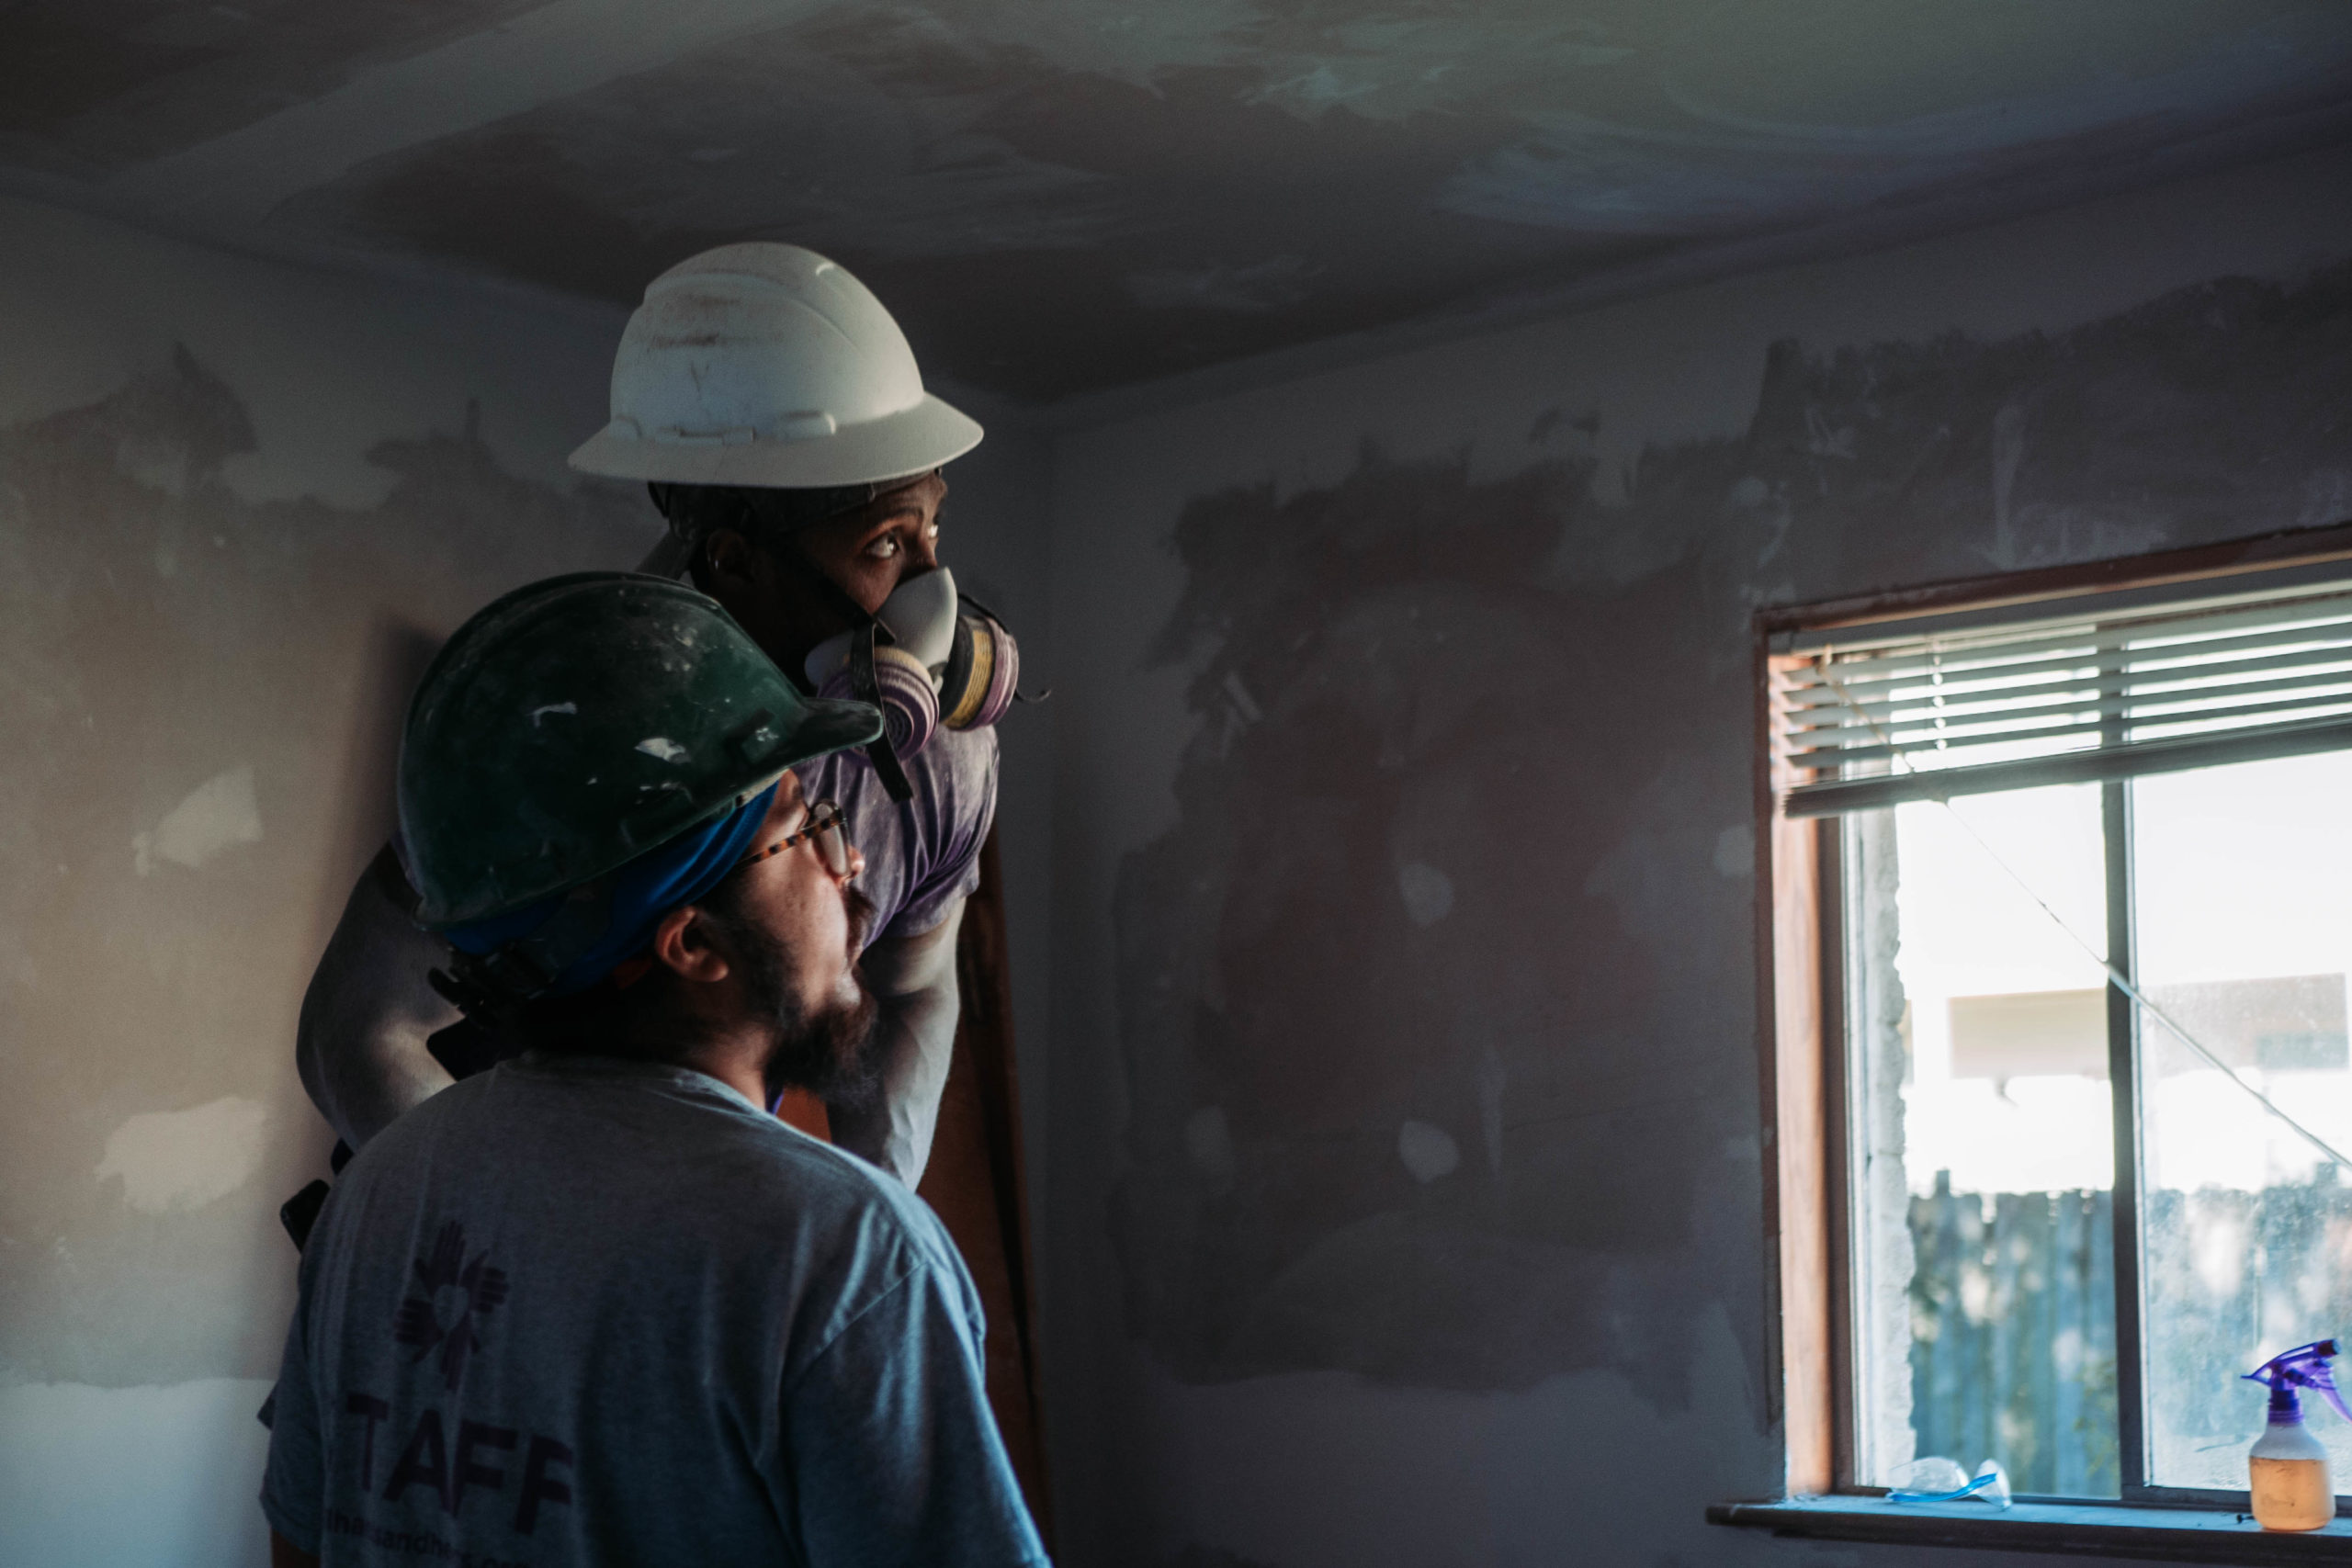 two people looking at a window in hardhats